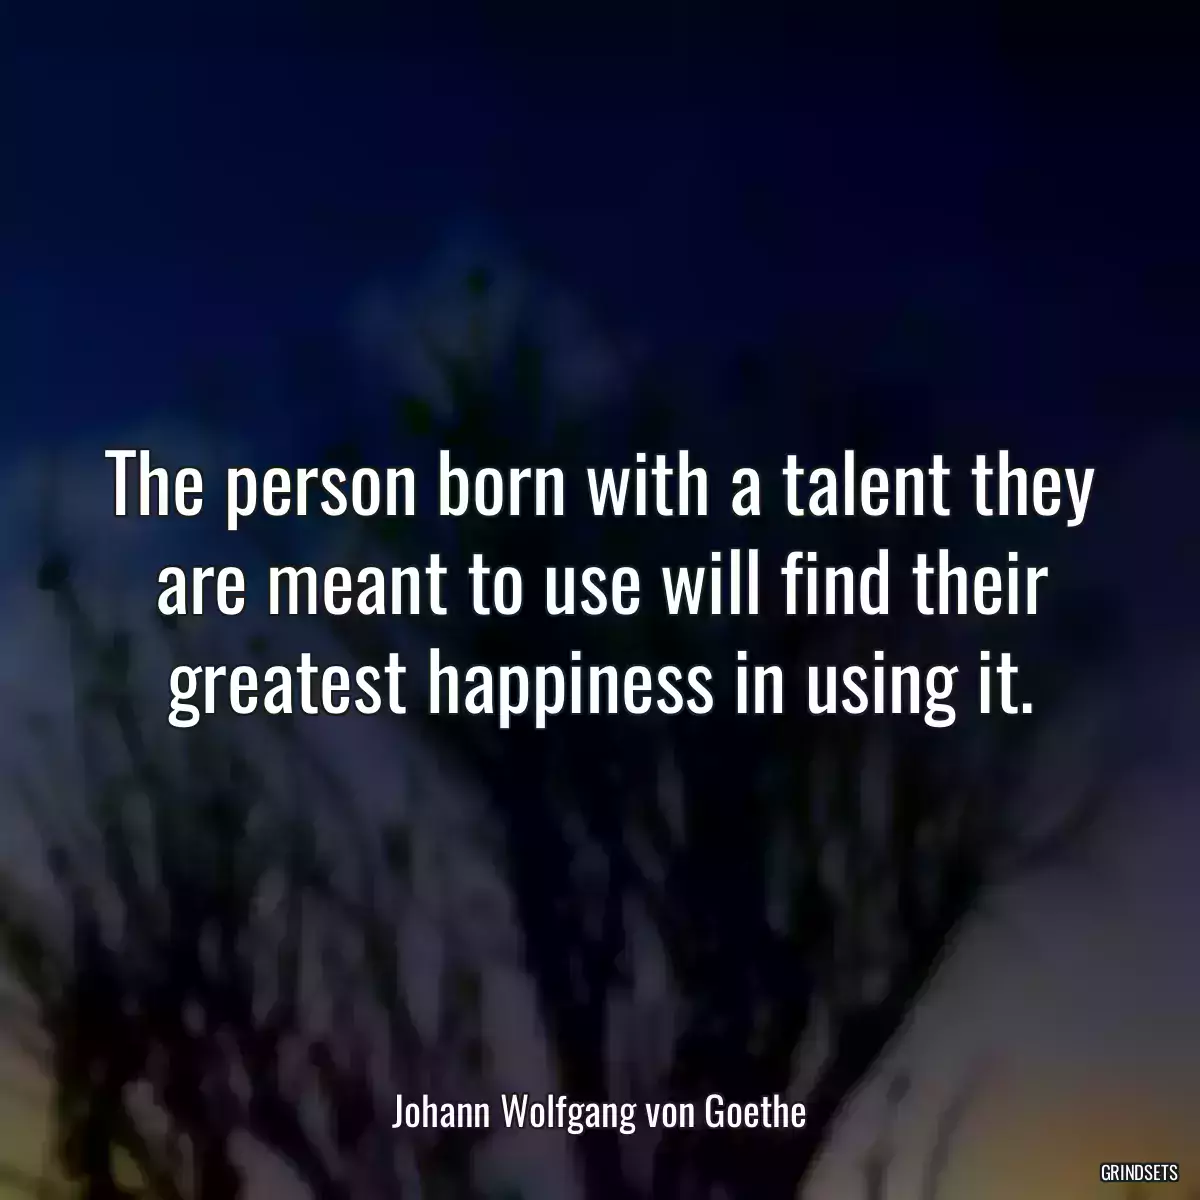 The person born with a talent they are meant to use will find their greatest happiness in using it.